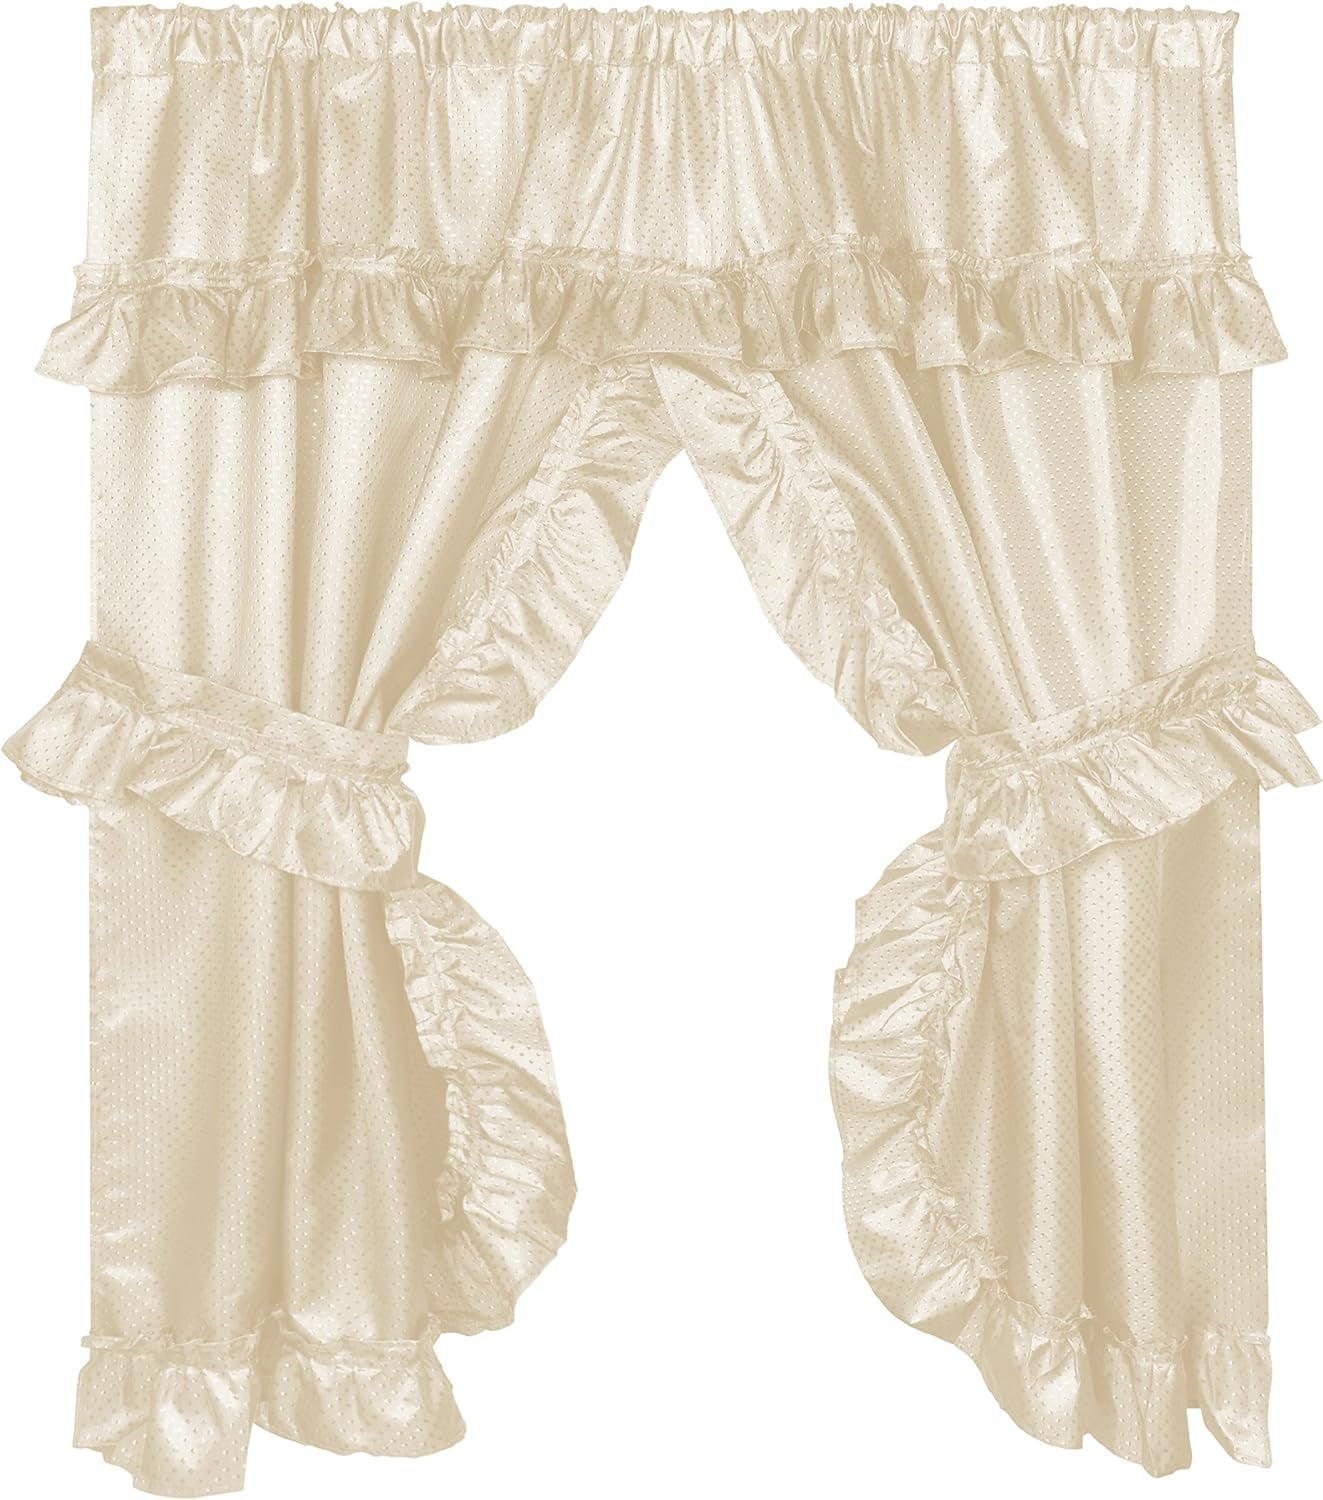 Carnation Home Fashions FWCD-L/16 Lauren Window Curtain with Ruffled Valance, Black  Carnation Home Fashions Ivory  